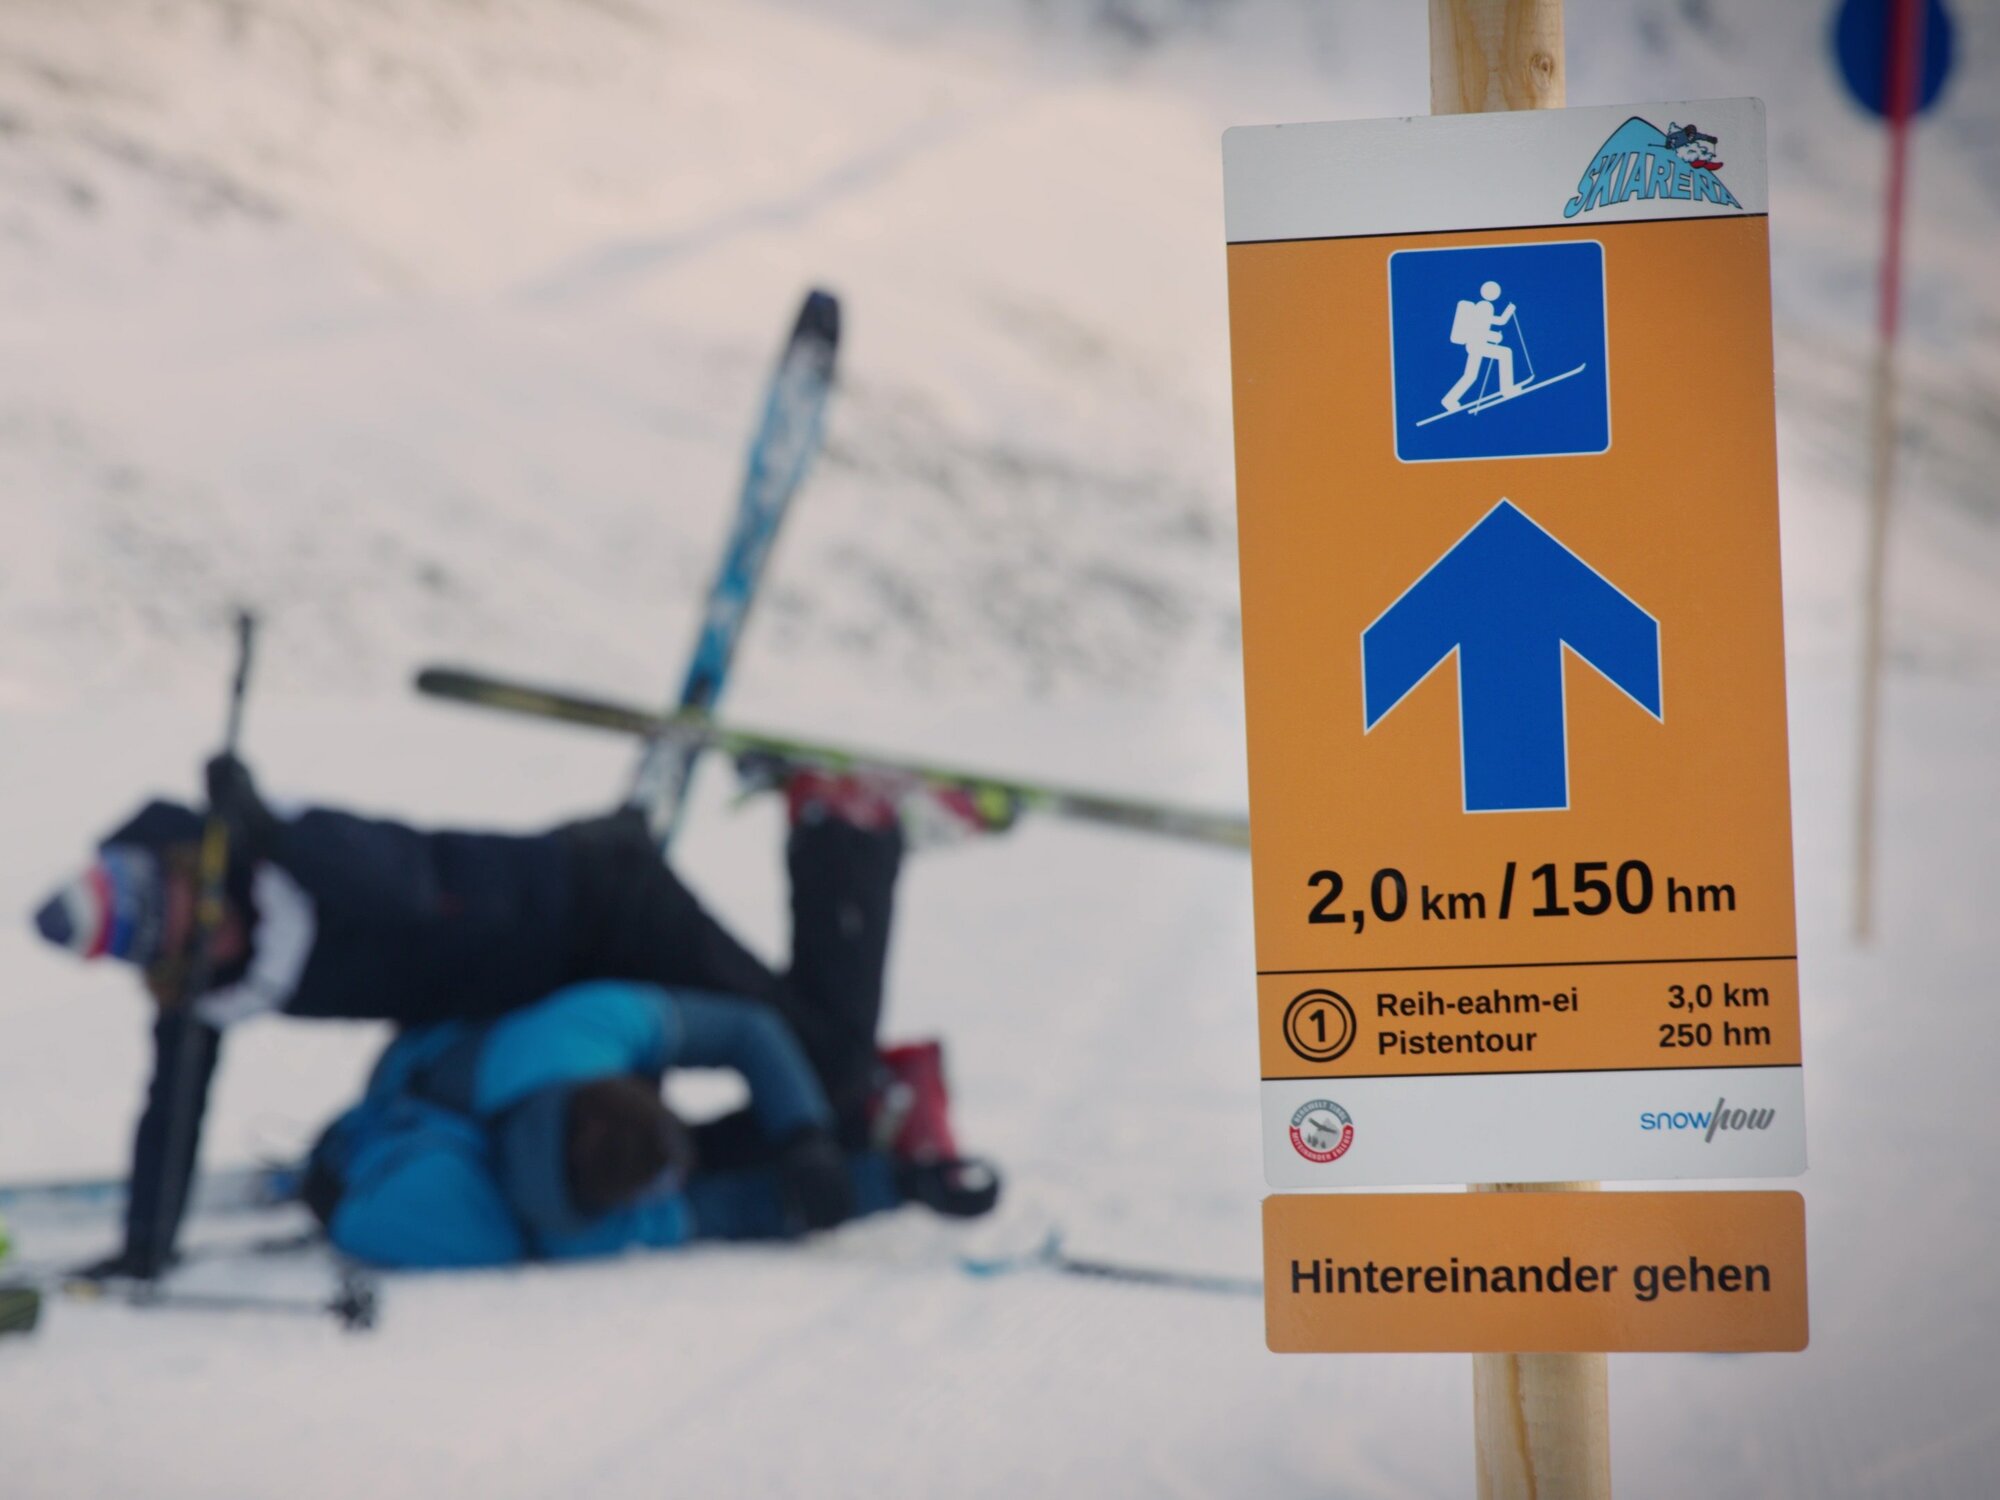 A piste tour sign indicates that you should ascend one after the other.